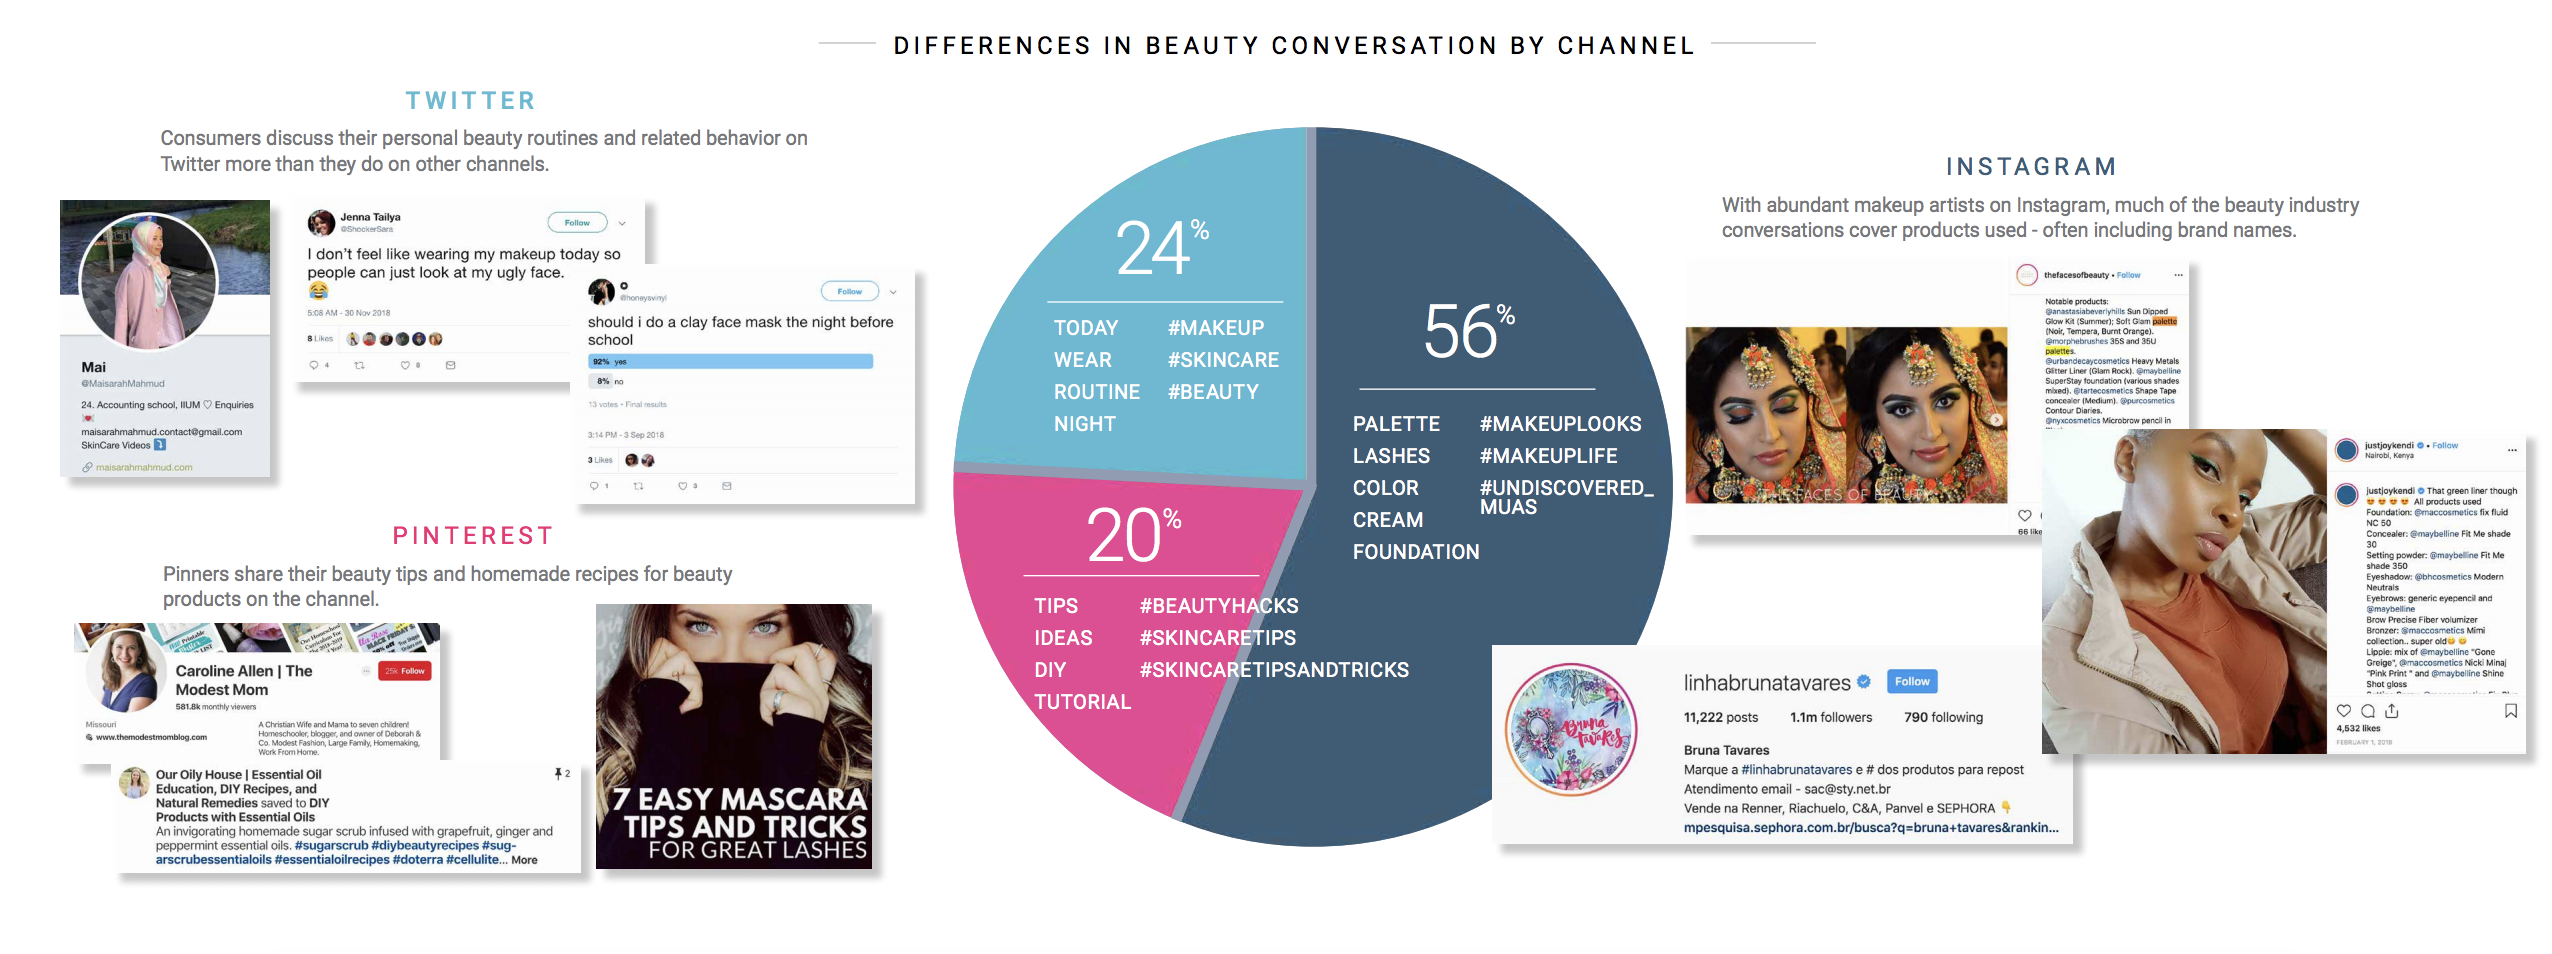 social media channel distribution for beauty and cosmetics using social listening